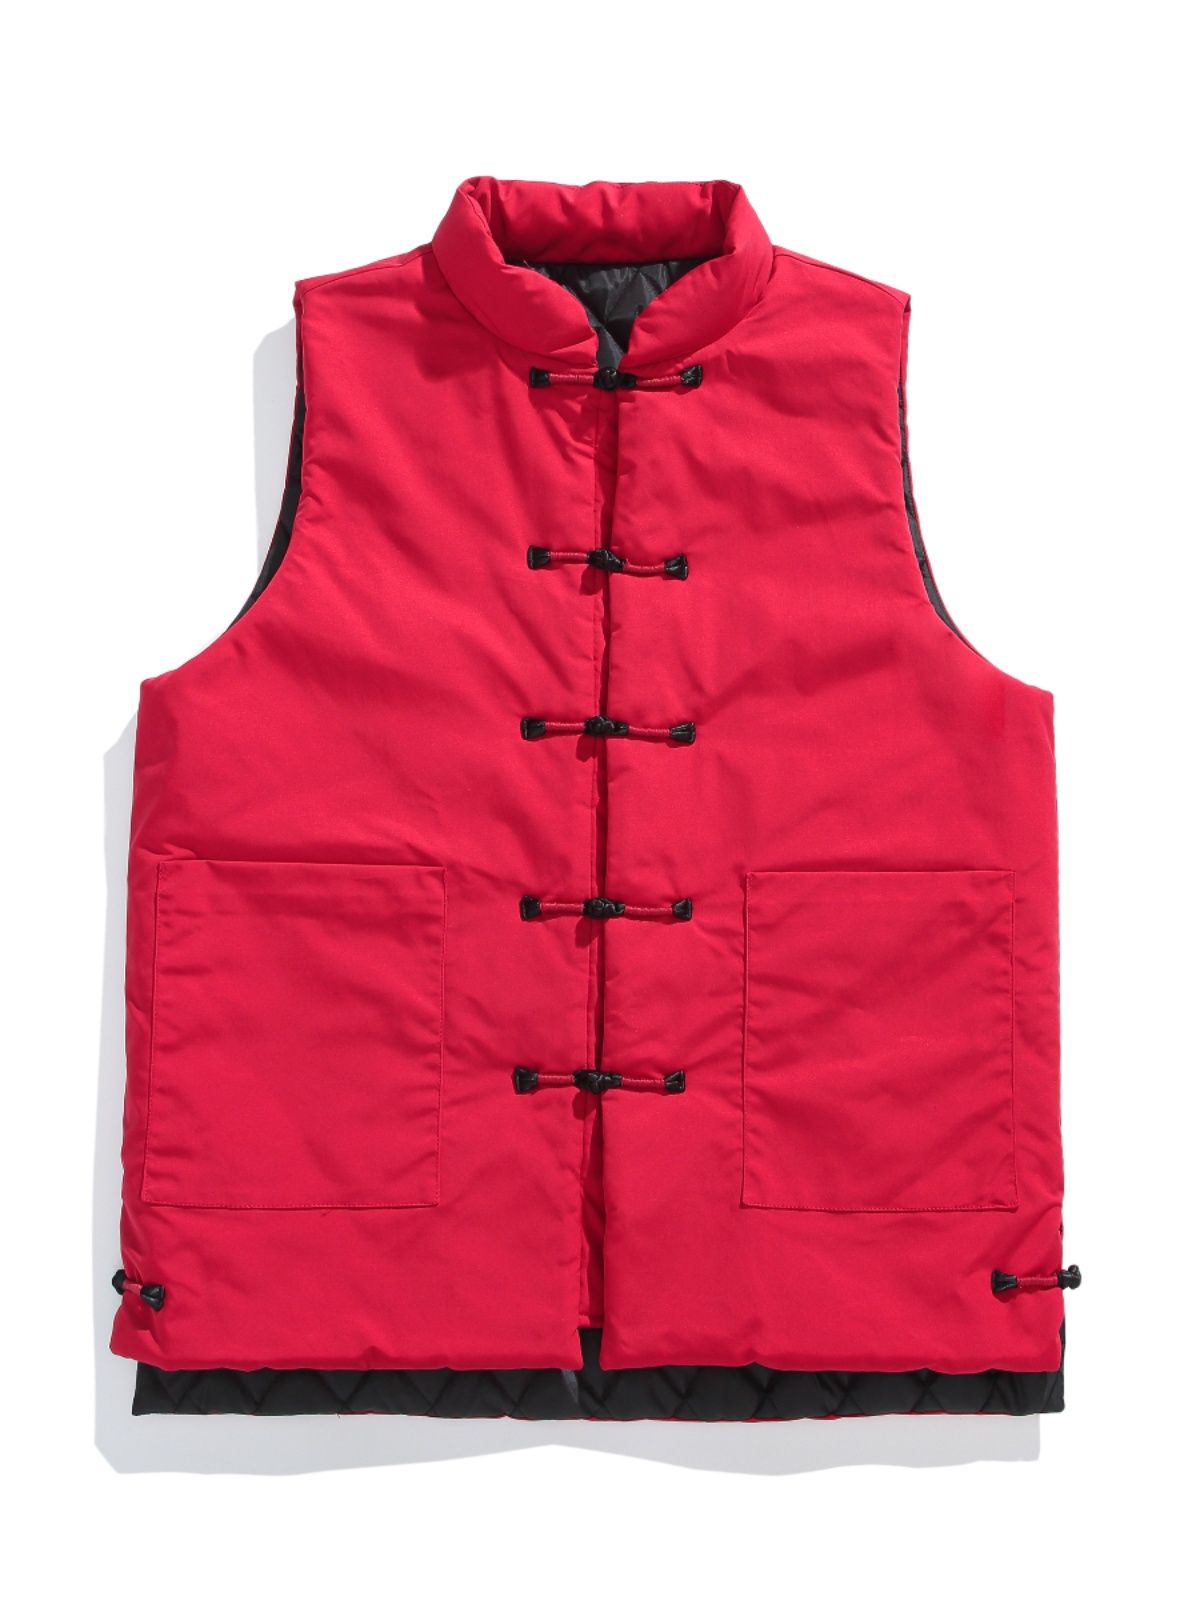 New Chinese style Tang suit Chinese style autumn and winter quilted thickened vest plate buckle waistcoat large size men's vest jacket